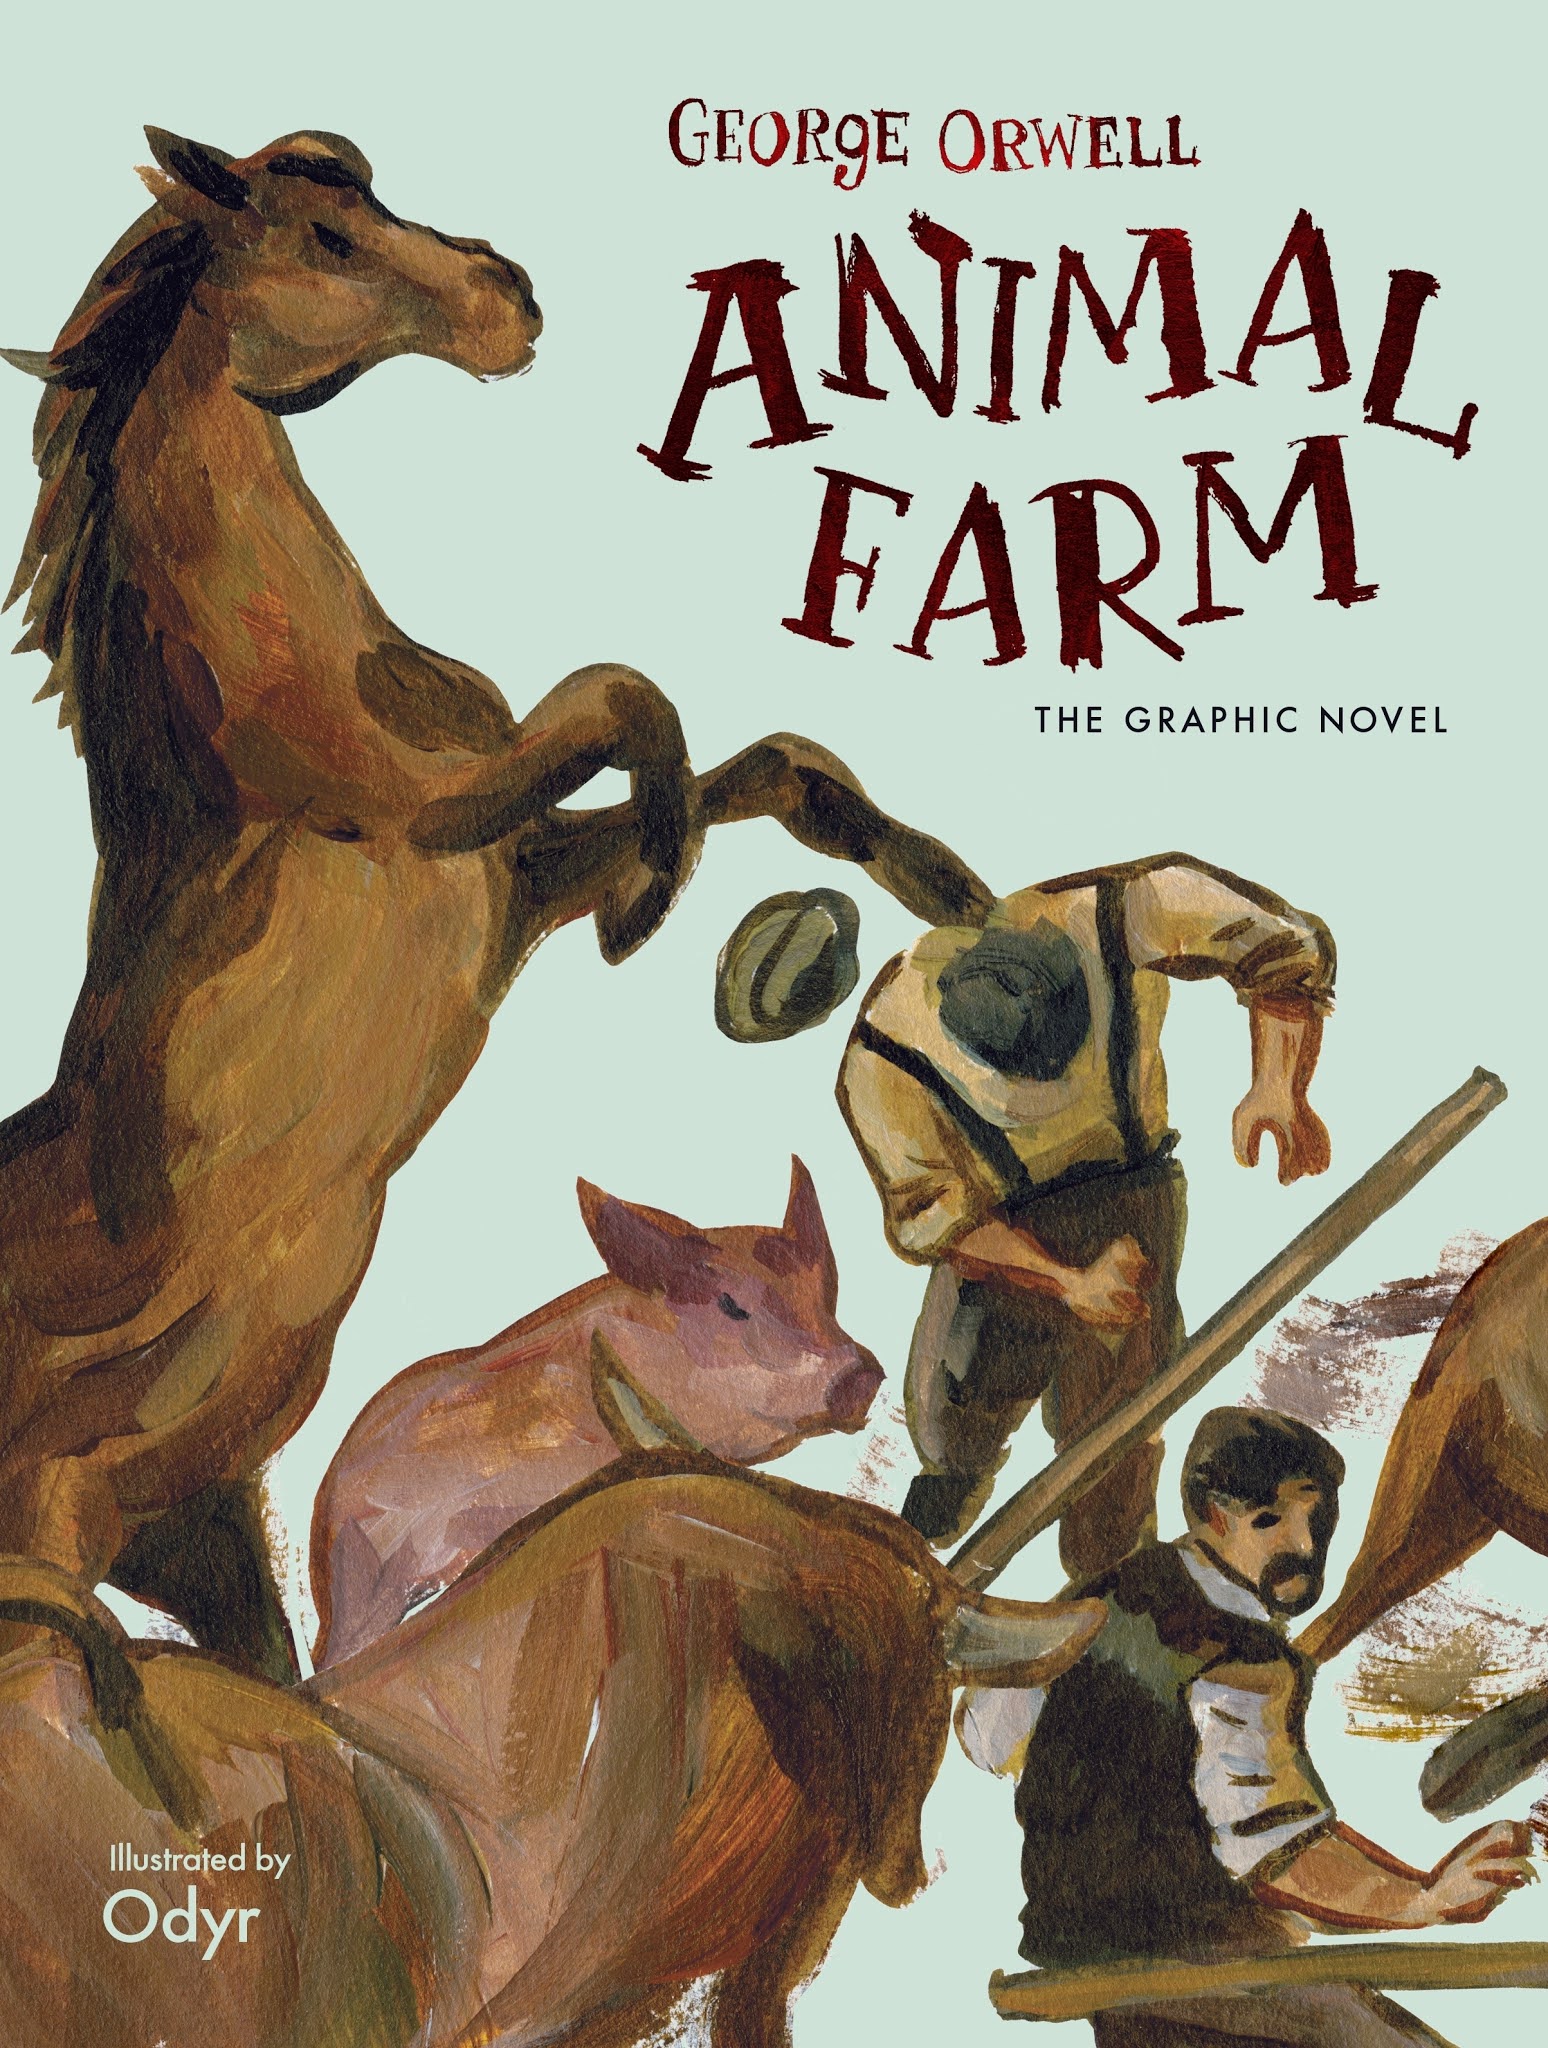 book review about animal farm